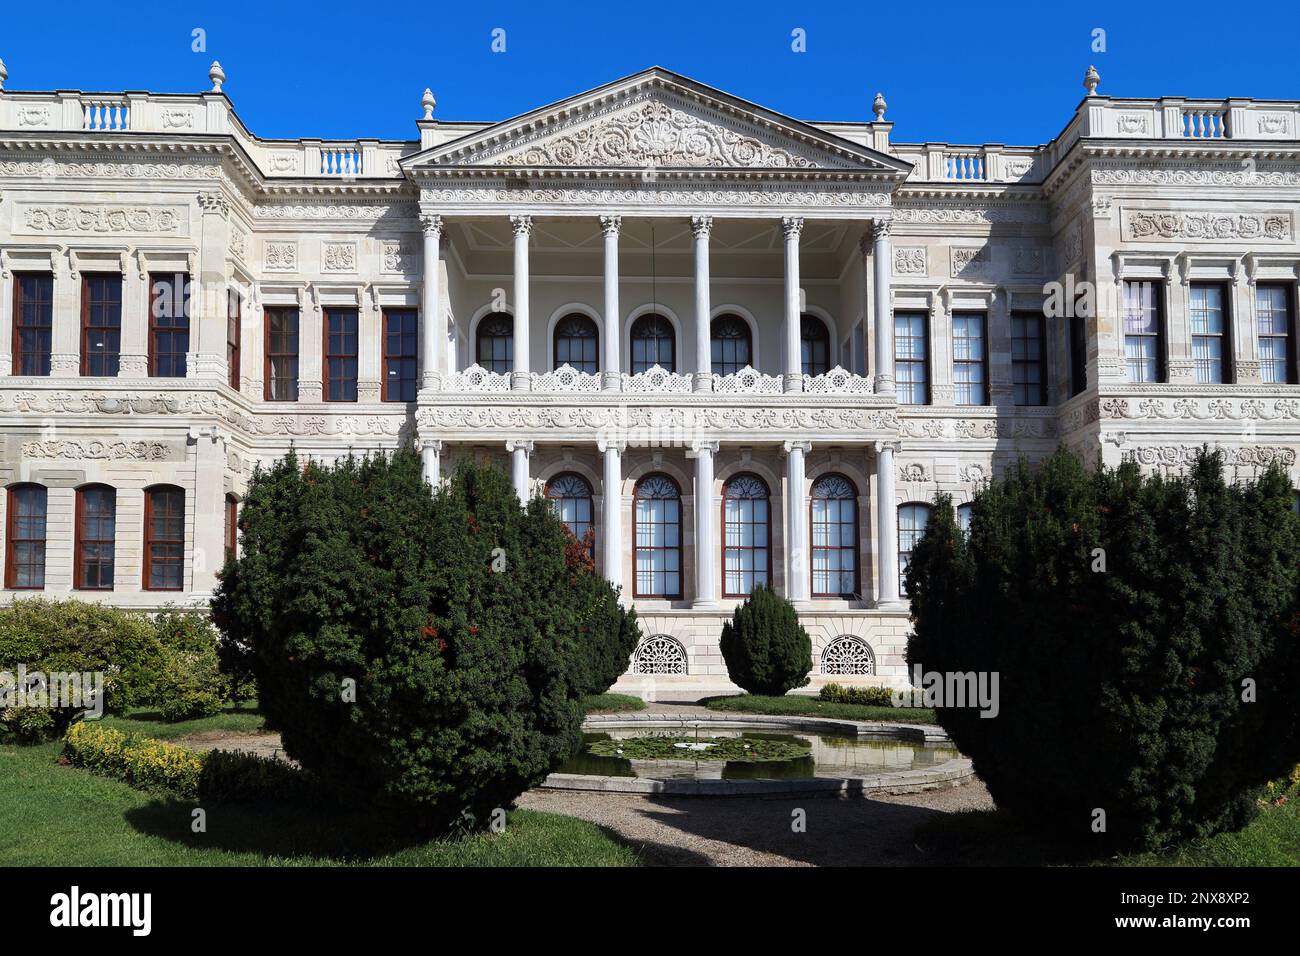 ISTANBUL, TURKEY - SEPTEMBER 13, 2017: This building is the National Museum of Palace Painting, built in the Ottoman Baroque style. Stock Photo